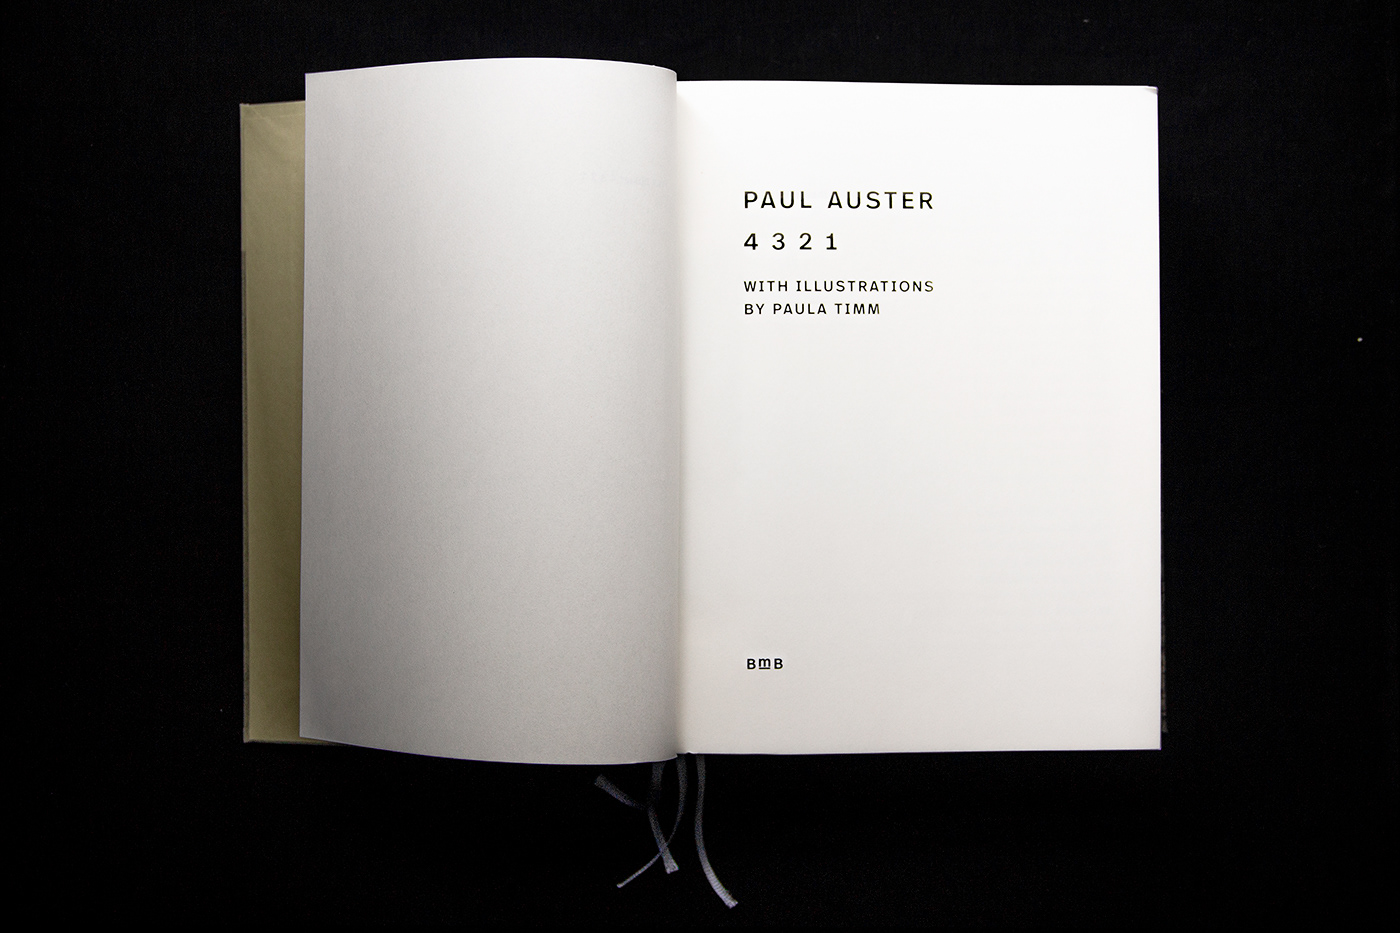 Paul Auster Muthesius kunsthockschule parallel universe bachelor literature storytelling   thesis Drawing  editorial design  New York